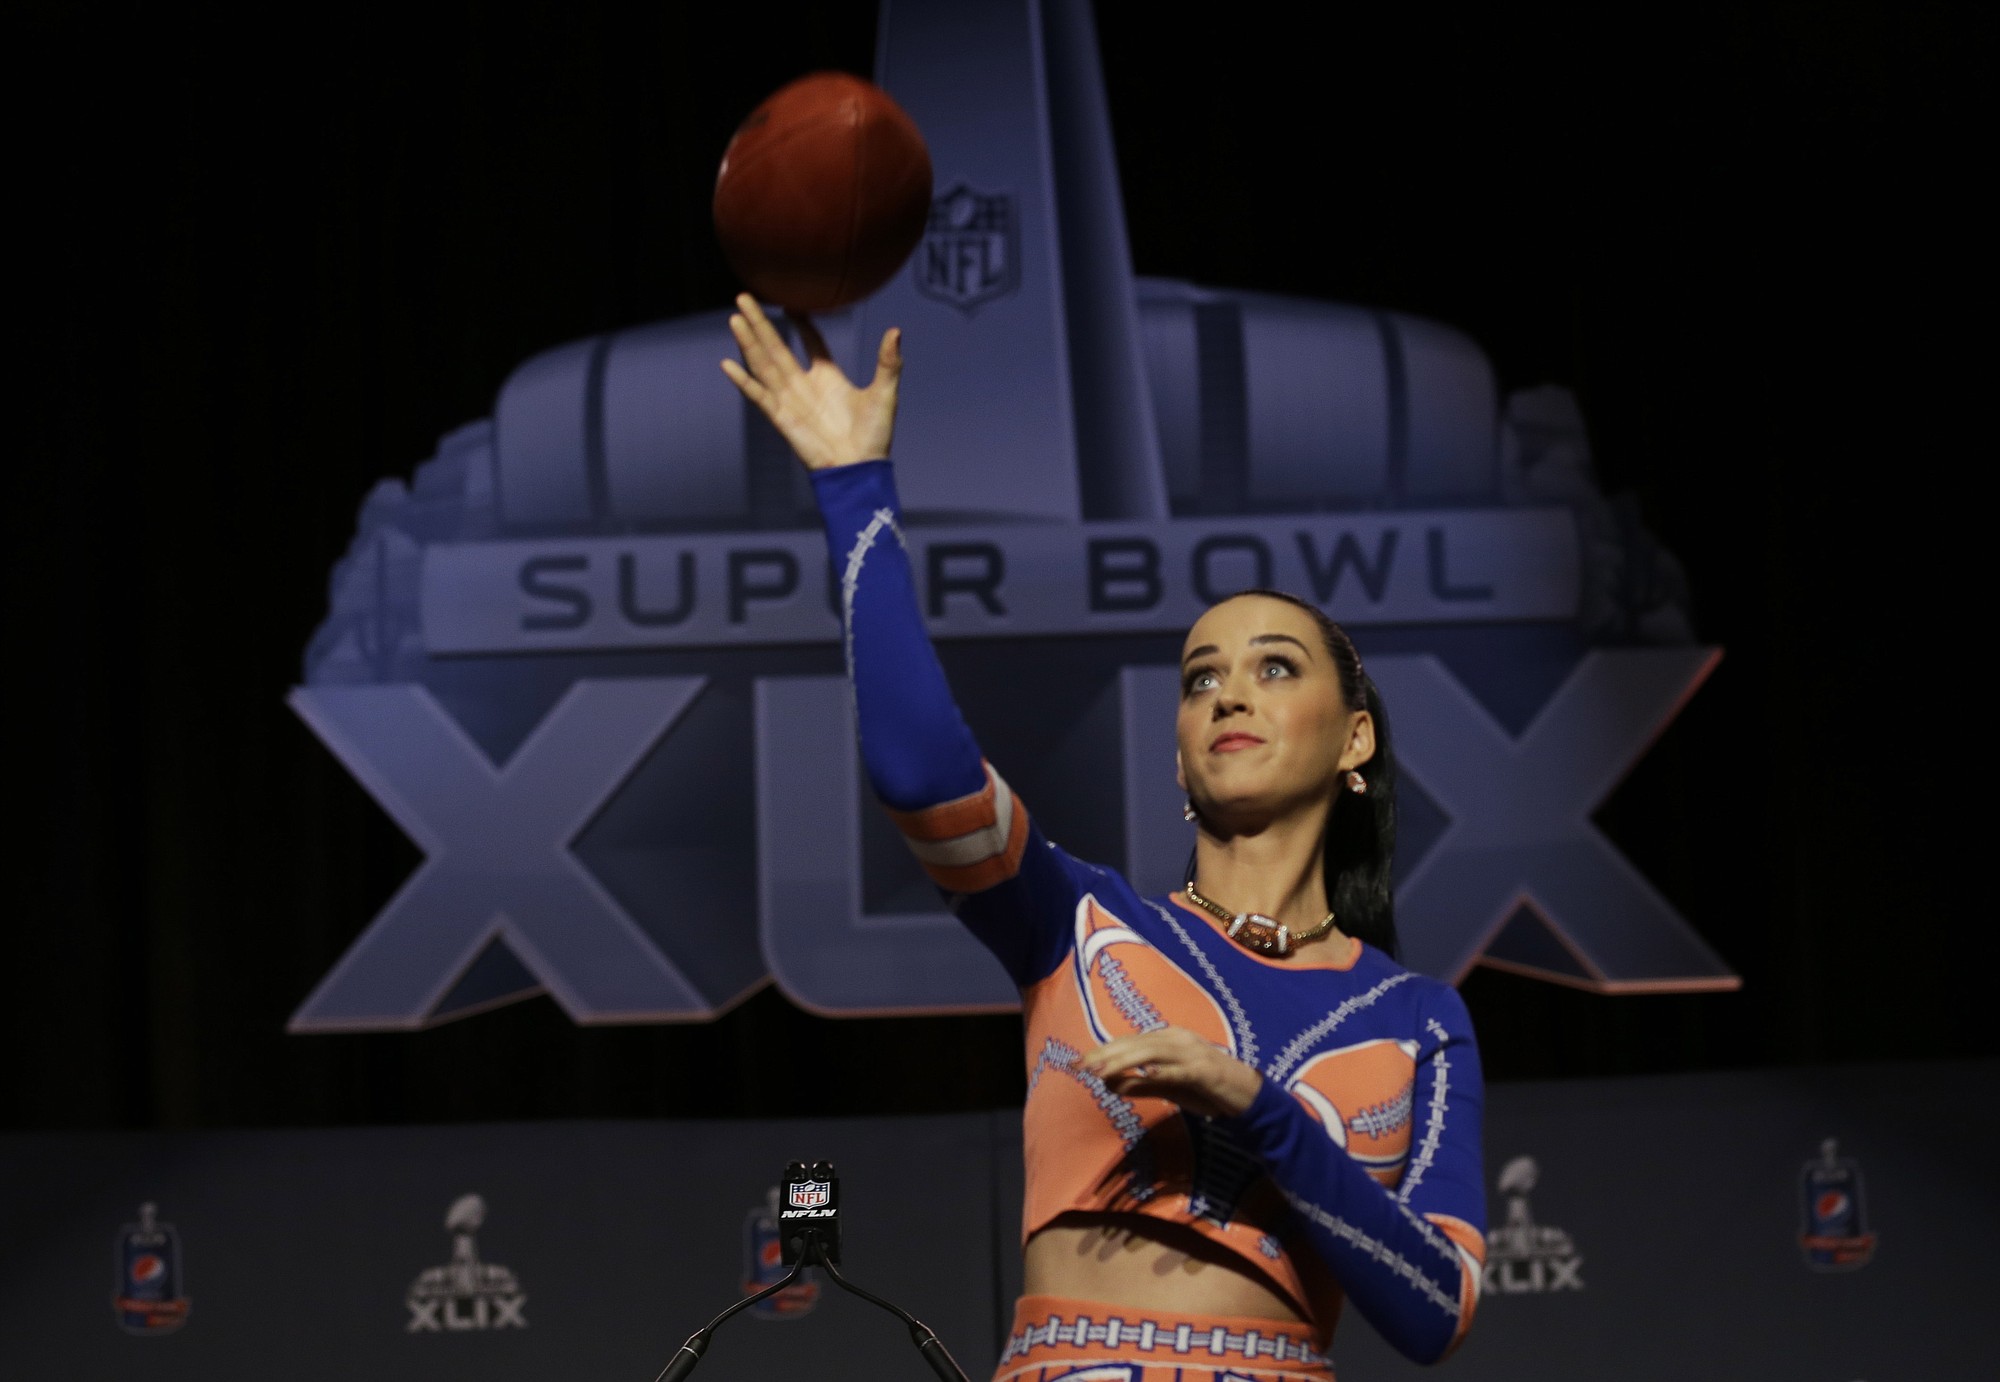 Katy Perry throws a football at a news conference for NFL Super Bowl XLIX Thursday in Phoenix.